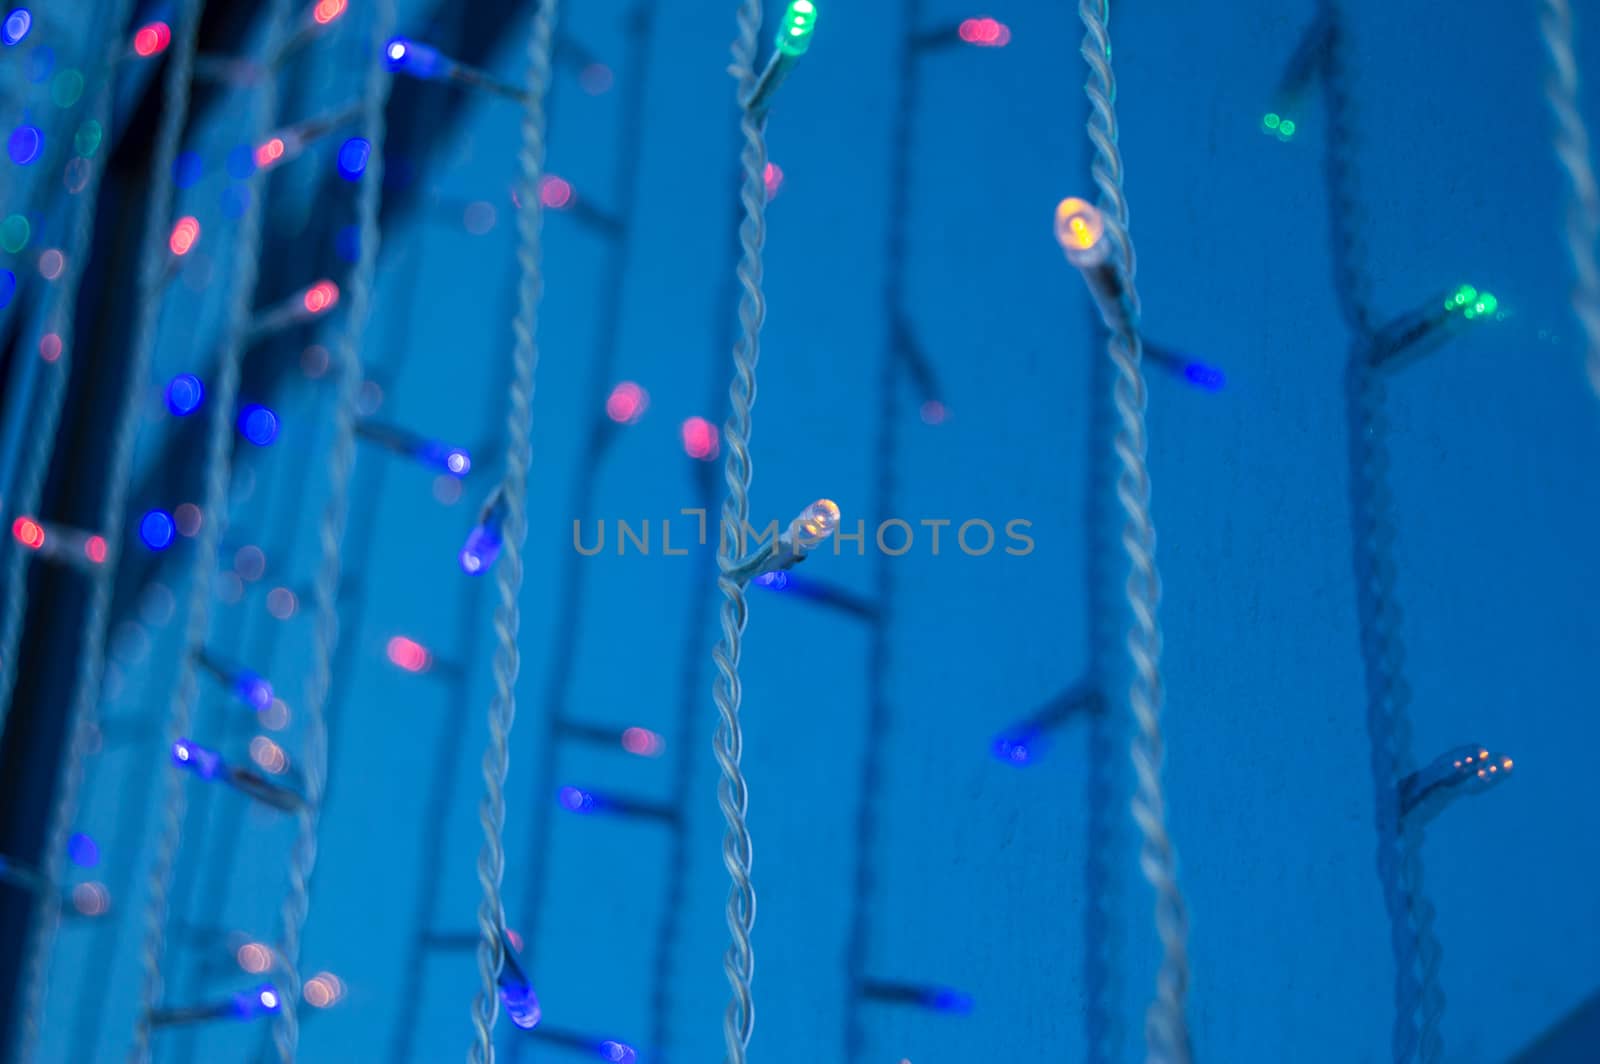 Festive decoration of office buildings, lights electric garland with lights by claire_lucia